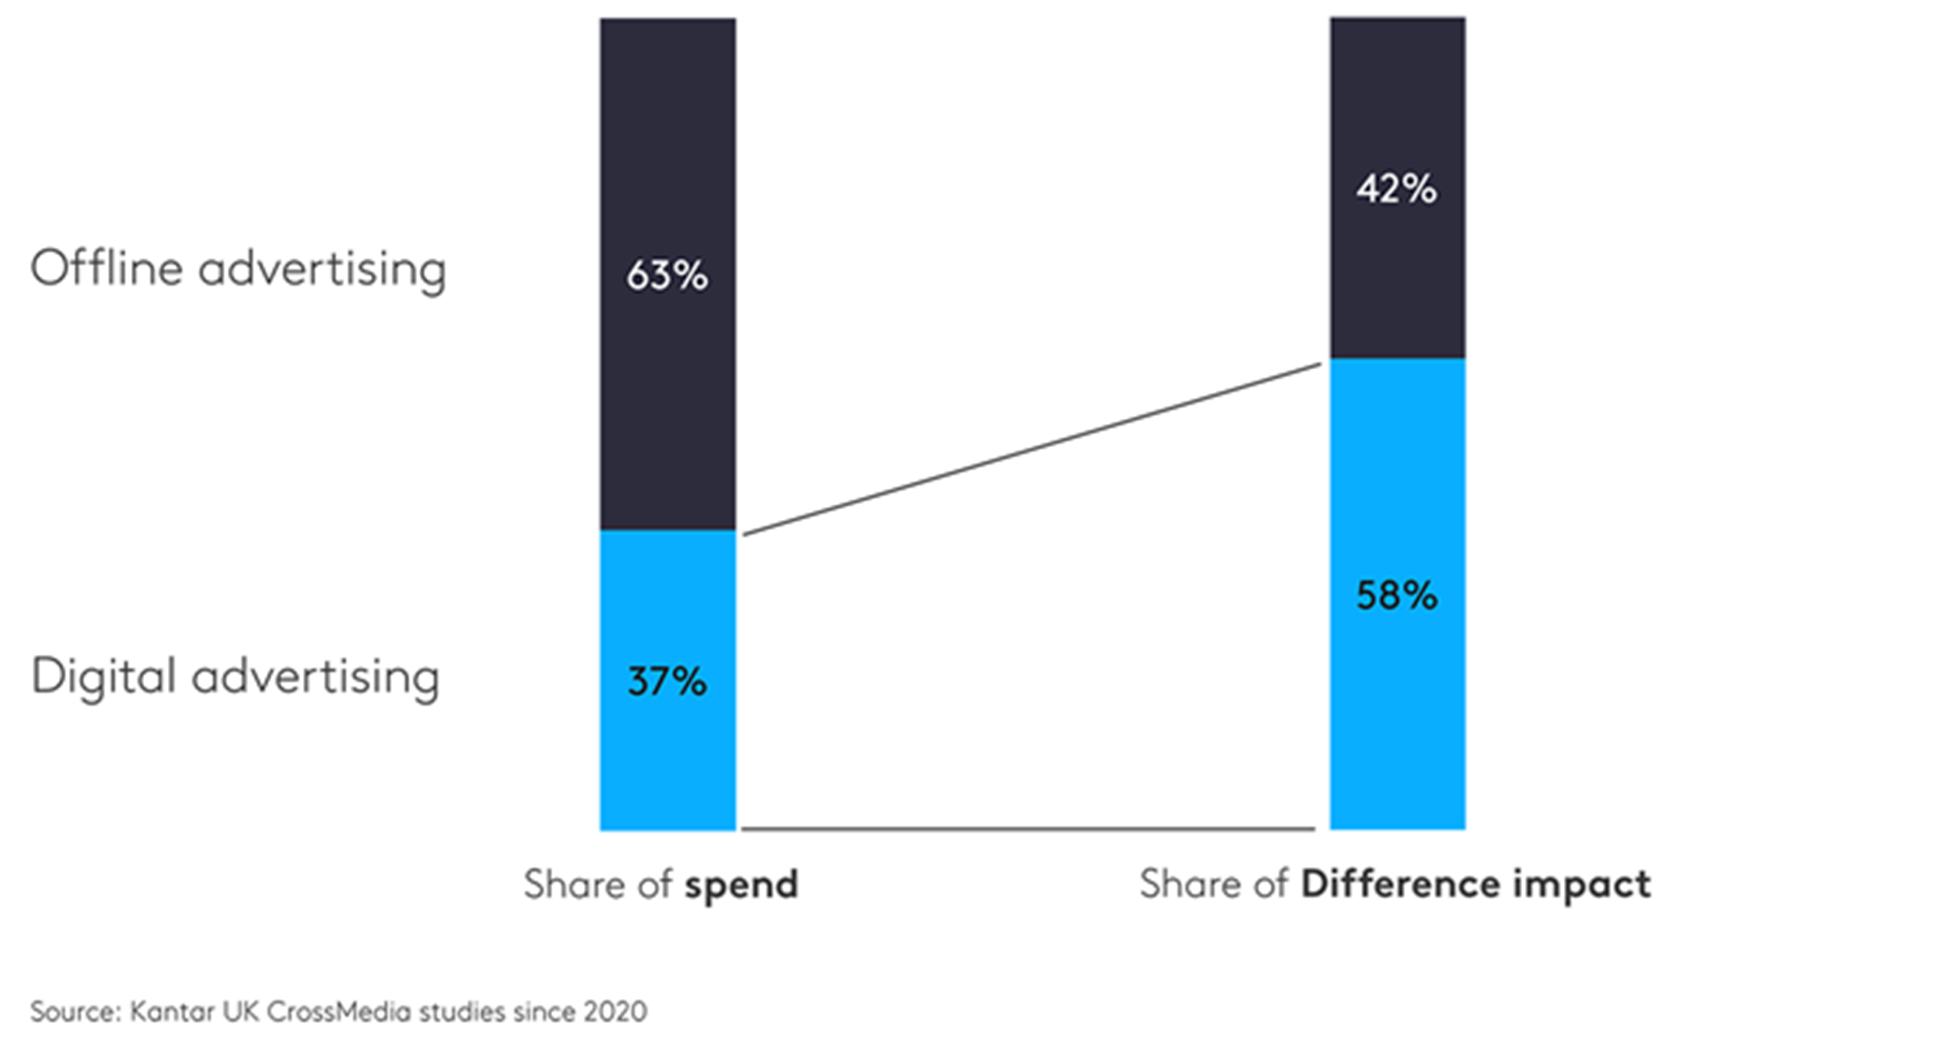 37% Digital advertising share of spend = 58% share of difference impact